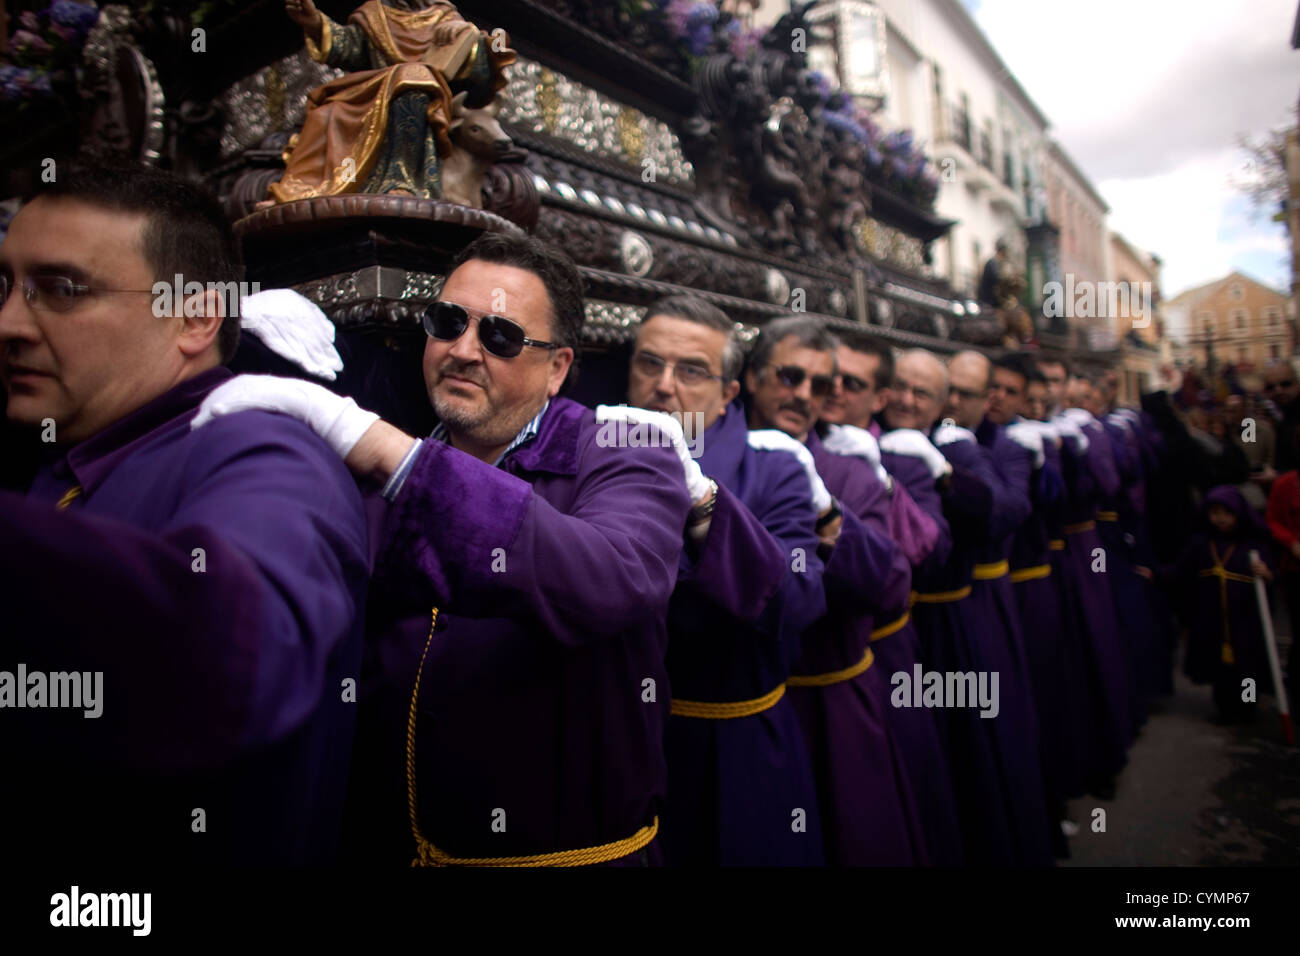 Easter Holy Week procession in Puente Genil in the province of Cordoba, Spain, April 3, 2012. Stock Photo